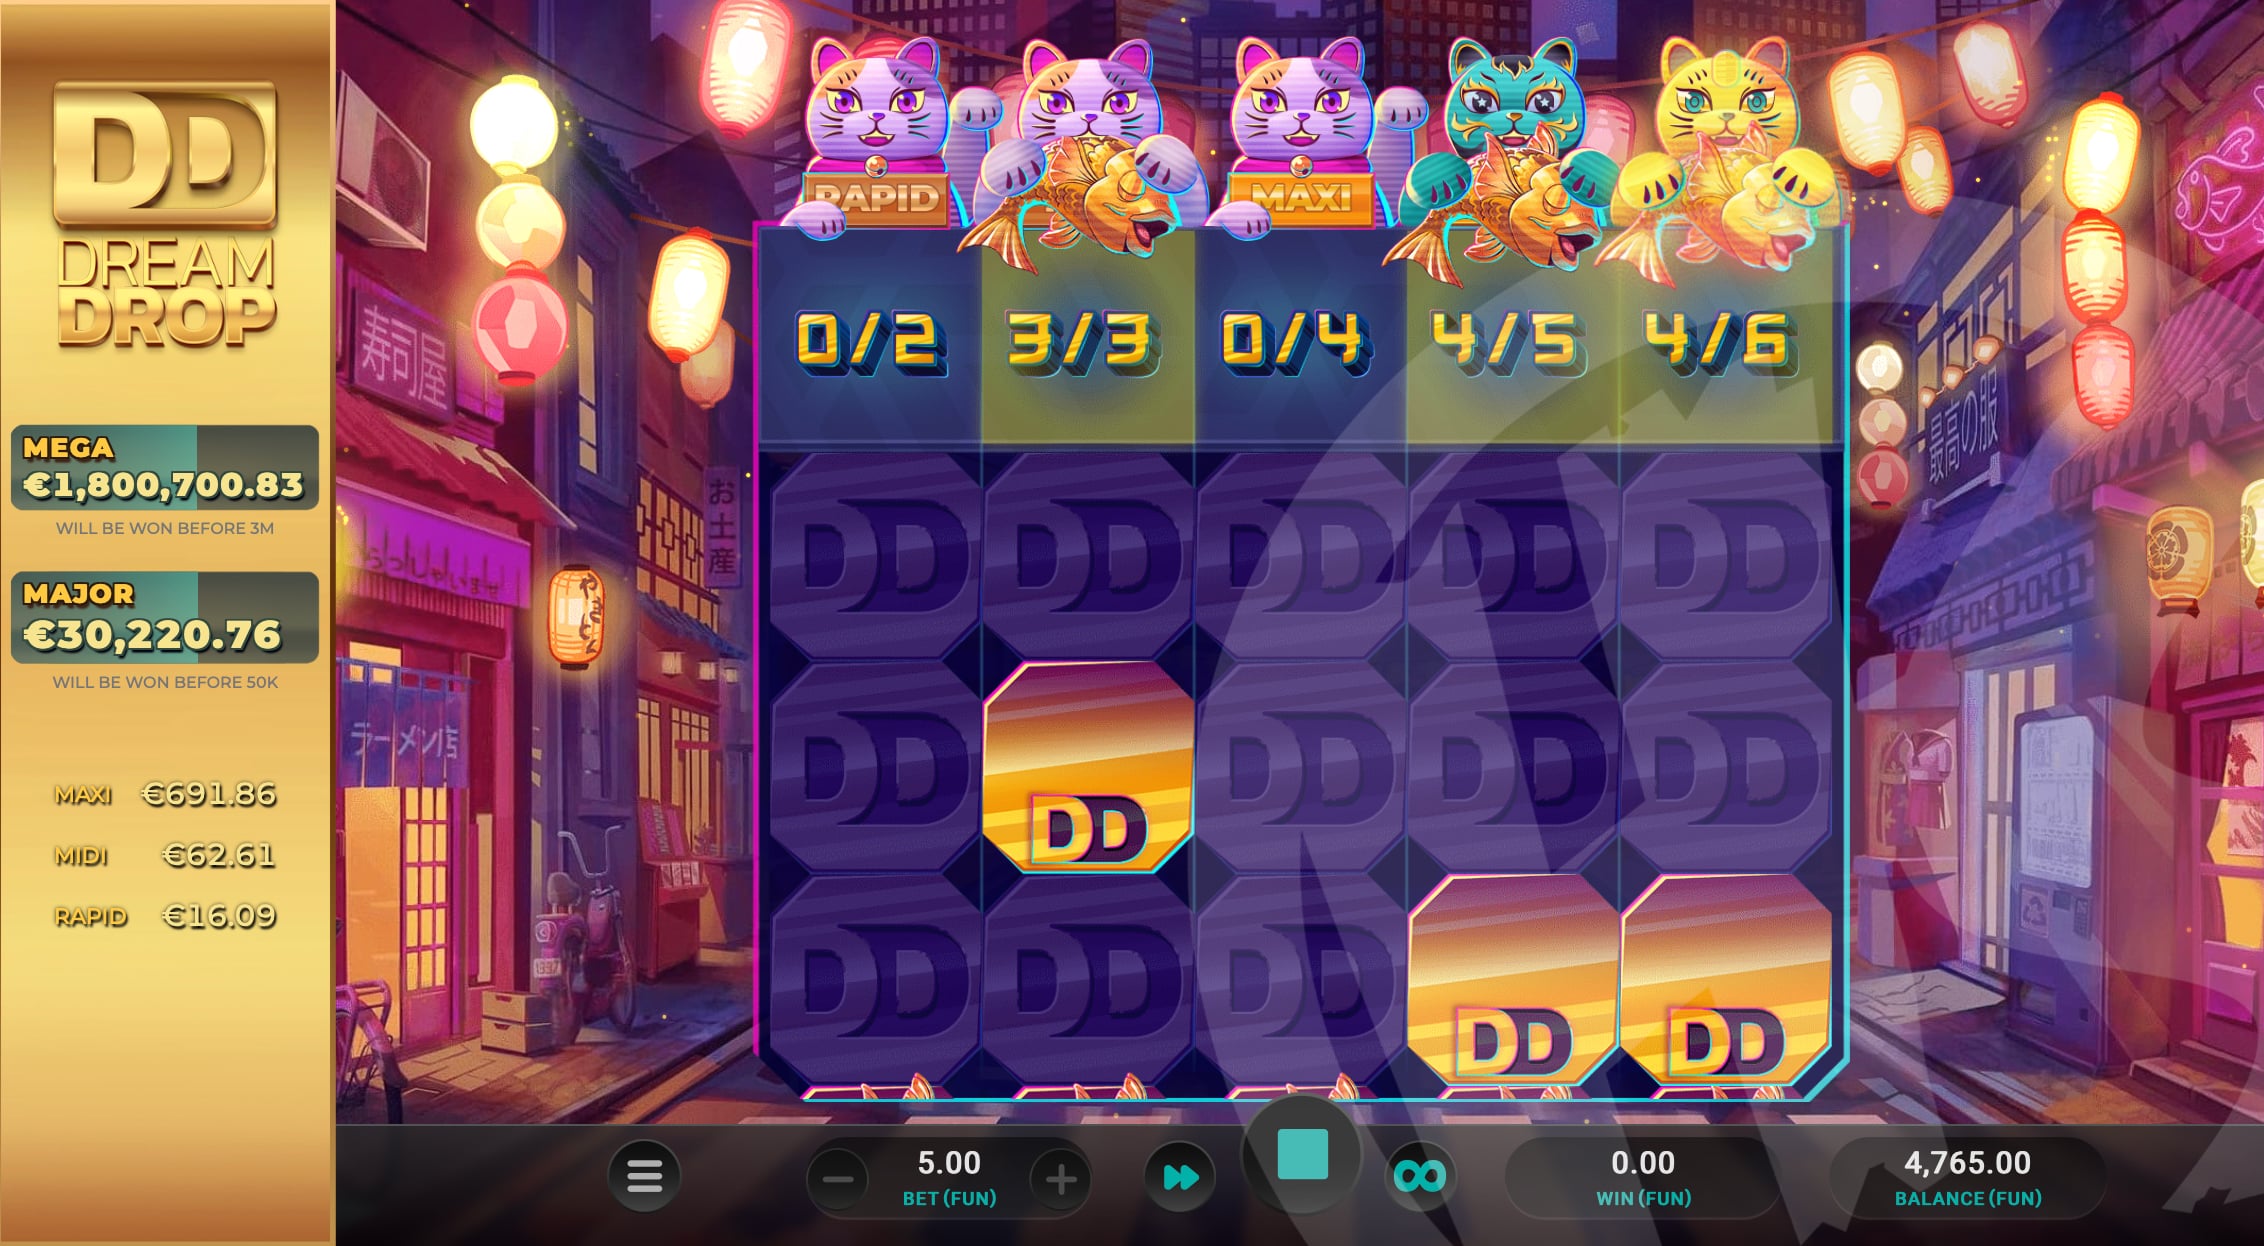 A Jackpot is Guaranteed in the Dream Drops Jackpot Round